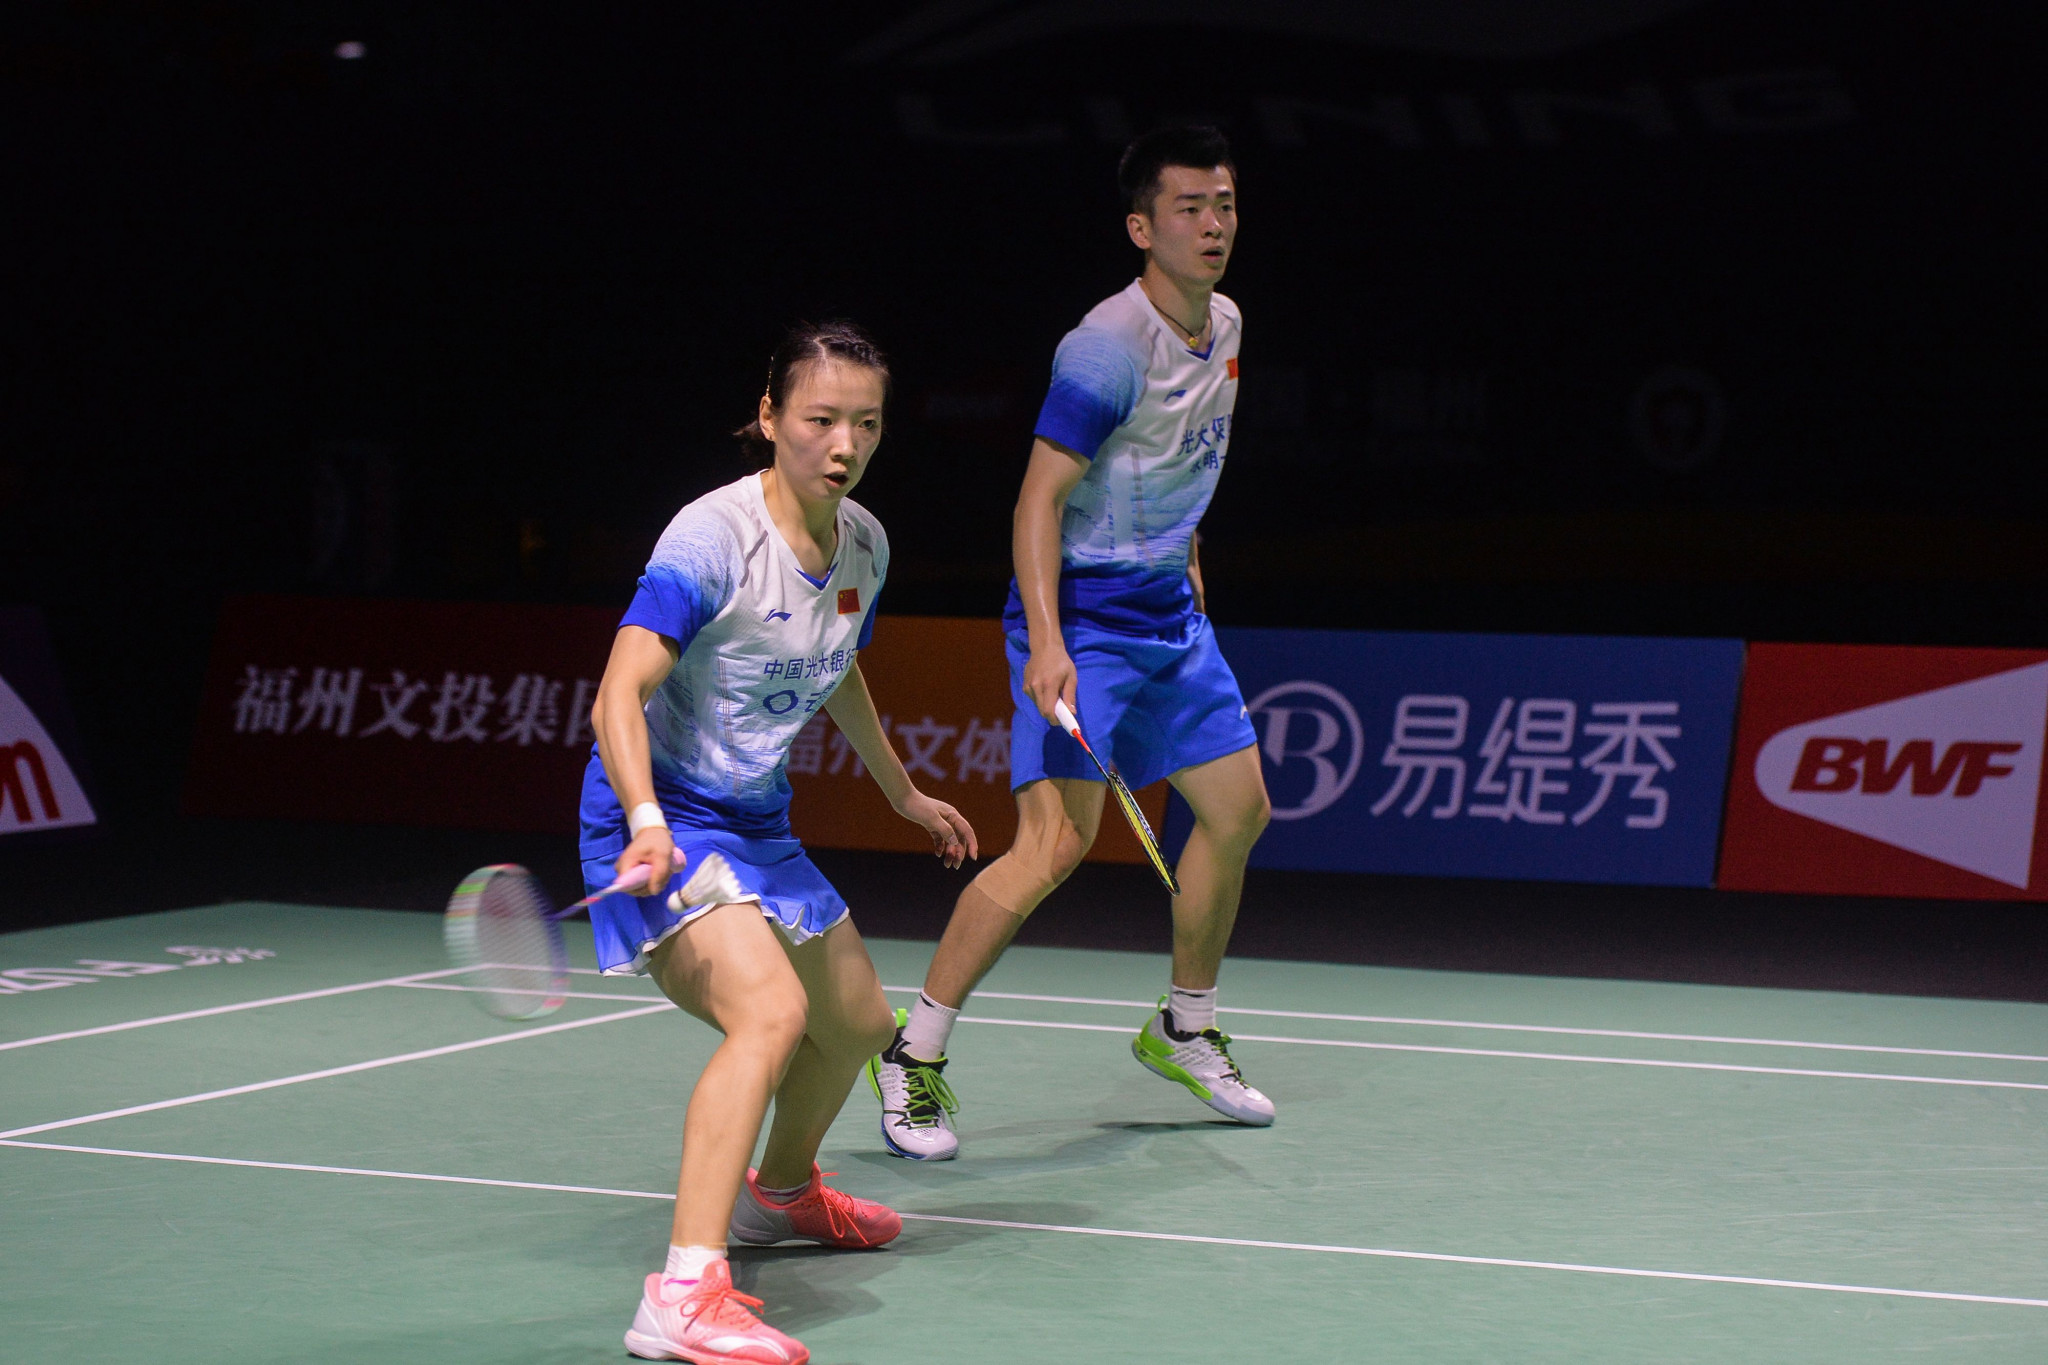 Mixed doubles world champions ease through at BWF Indonesia Masters